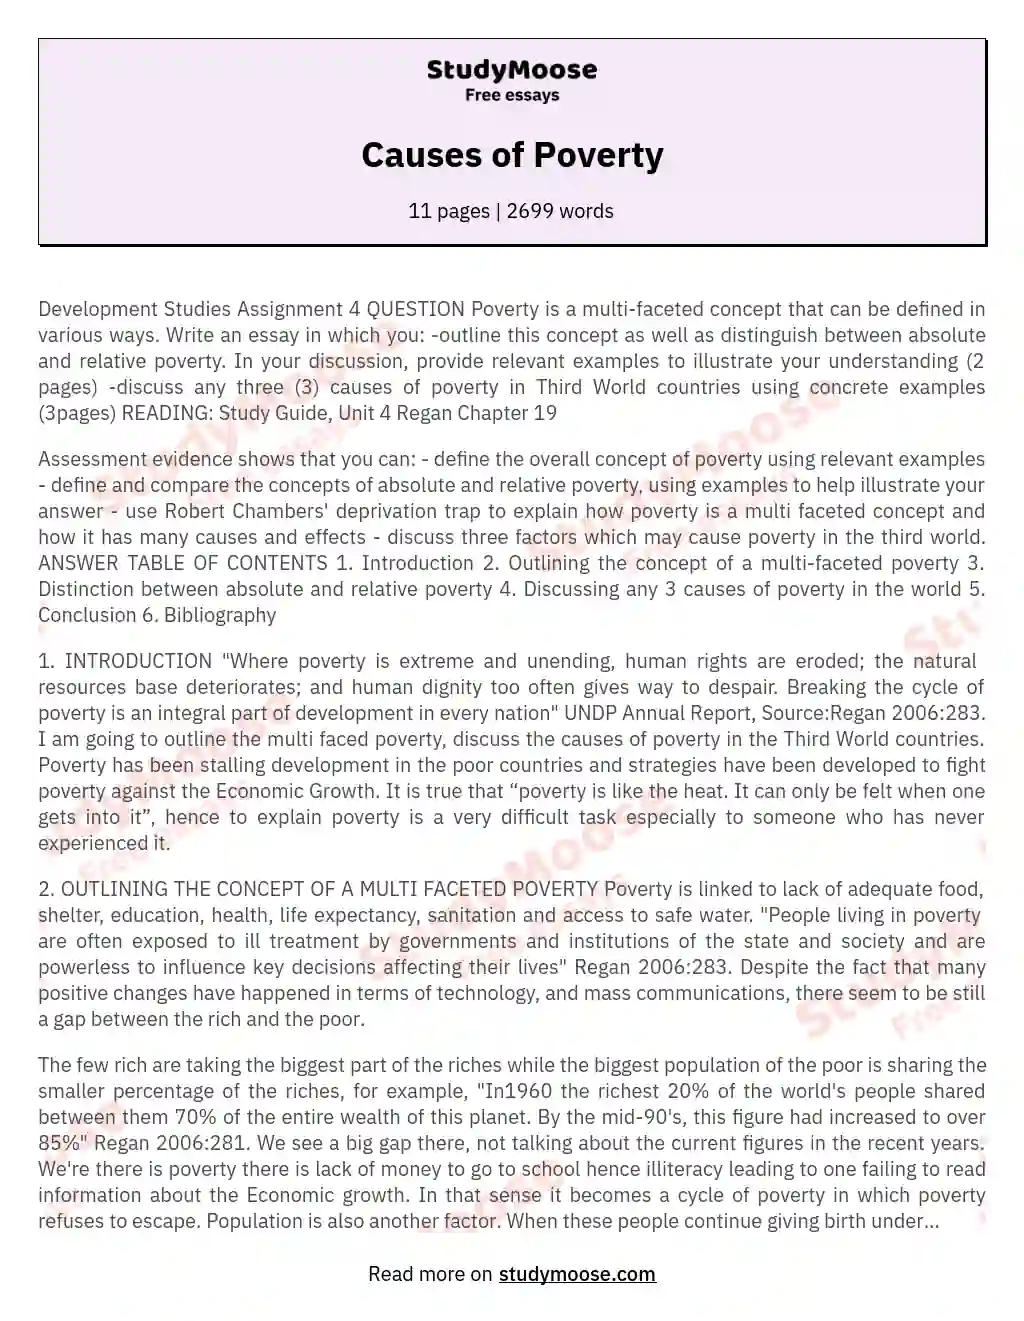 Causes of Poverty essay